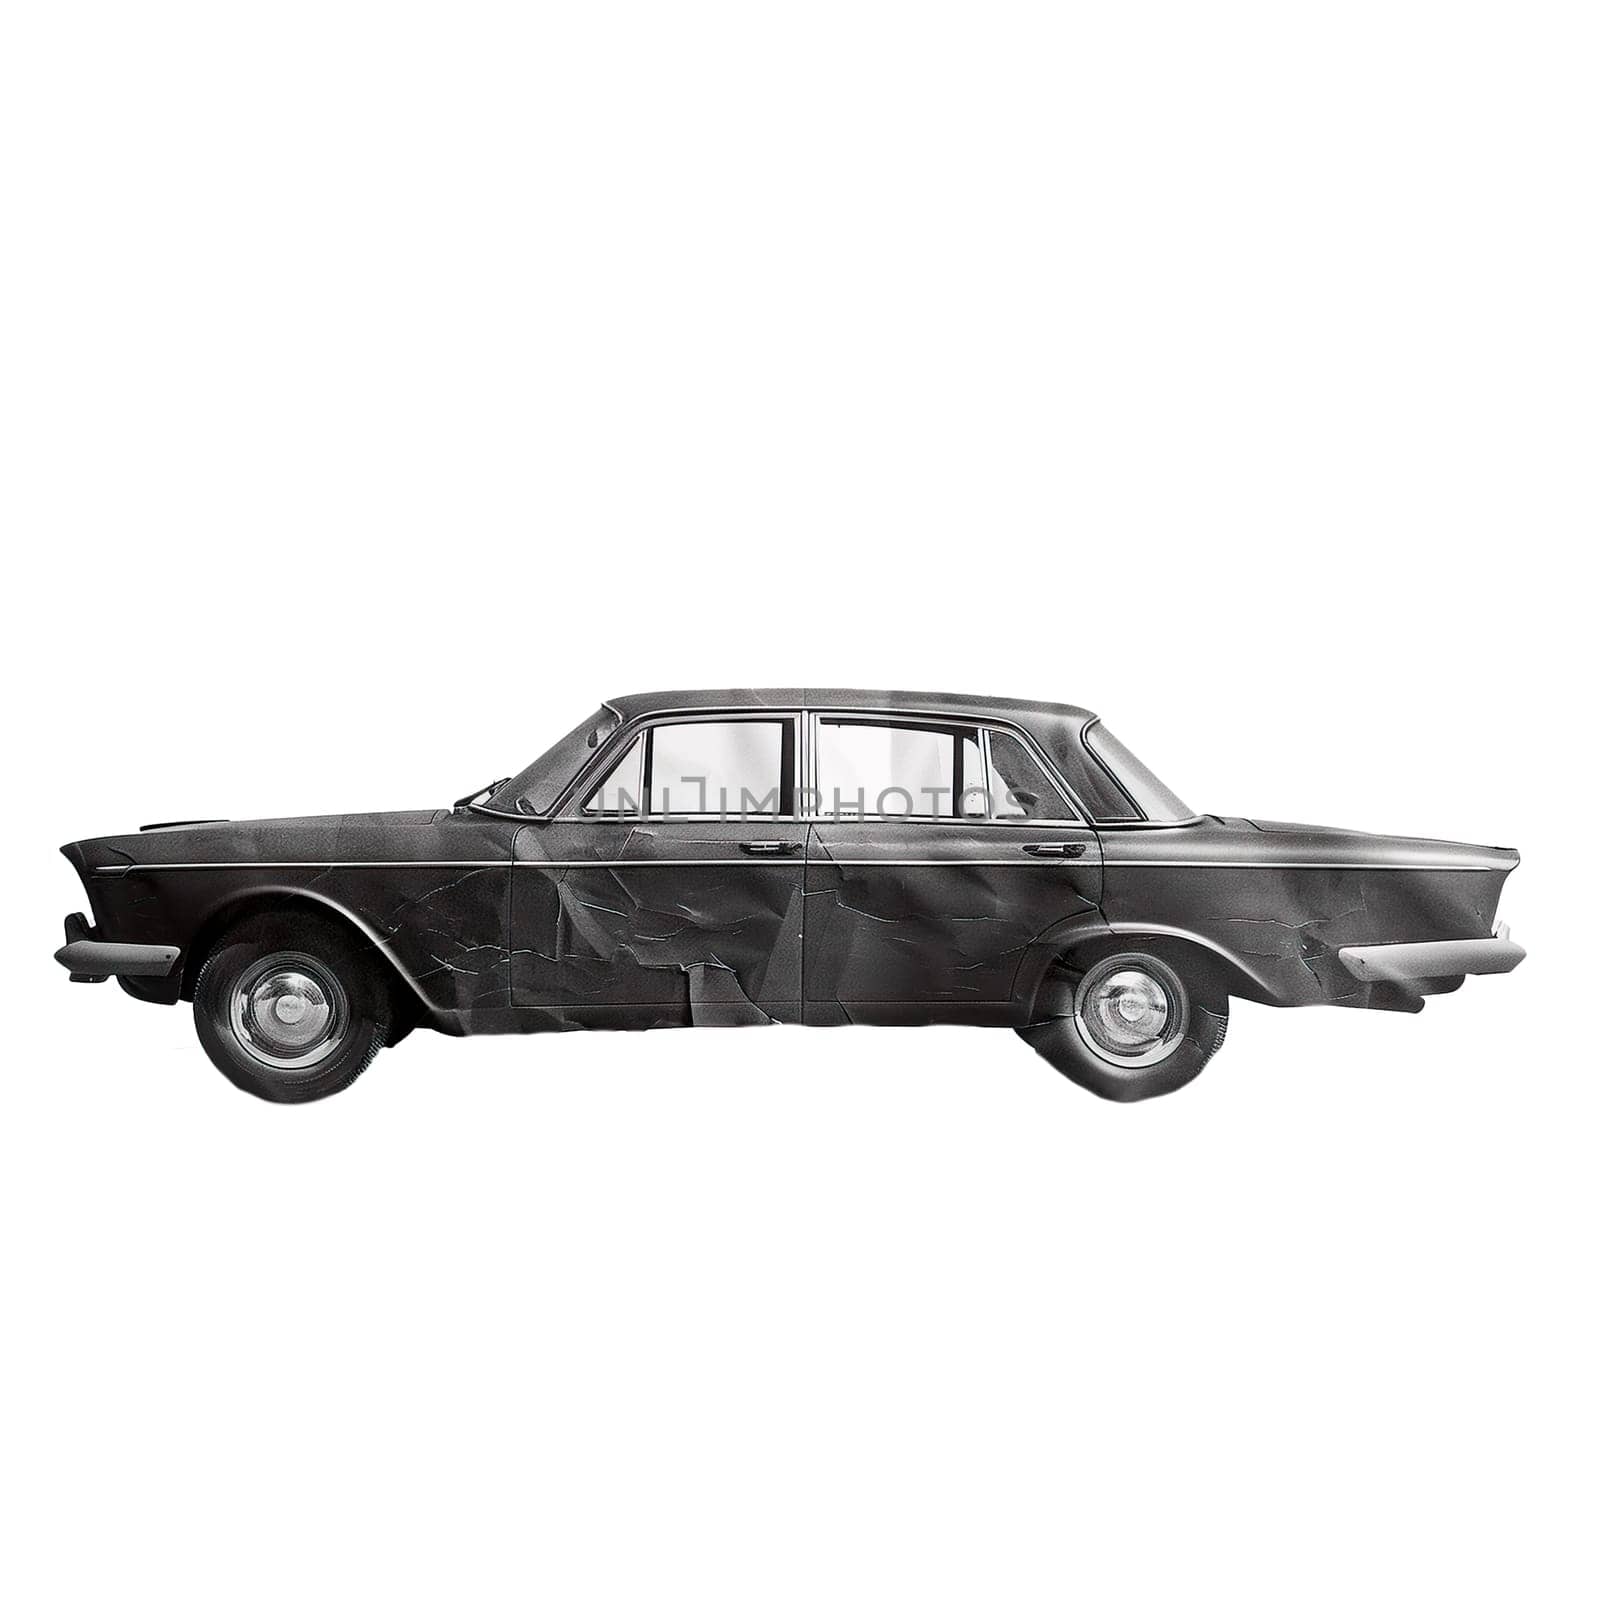 Vintage classic car side view isolated photo by Dustick